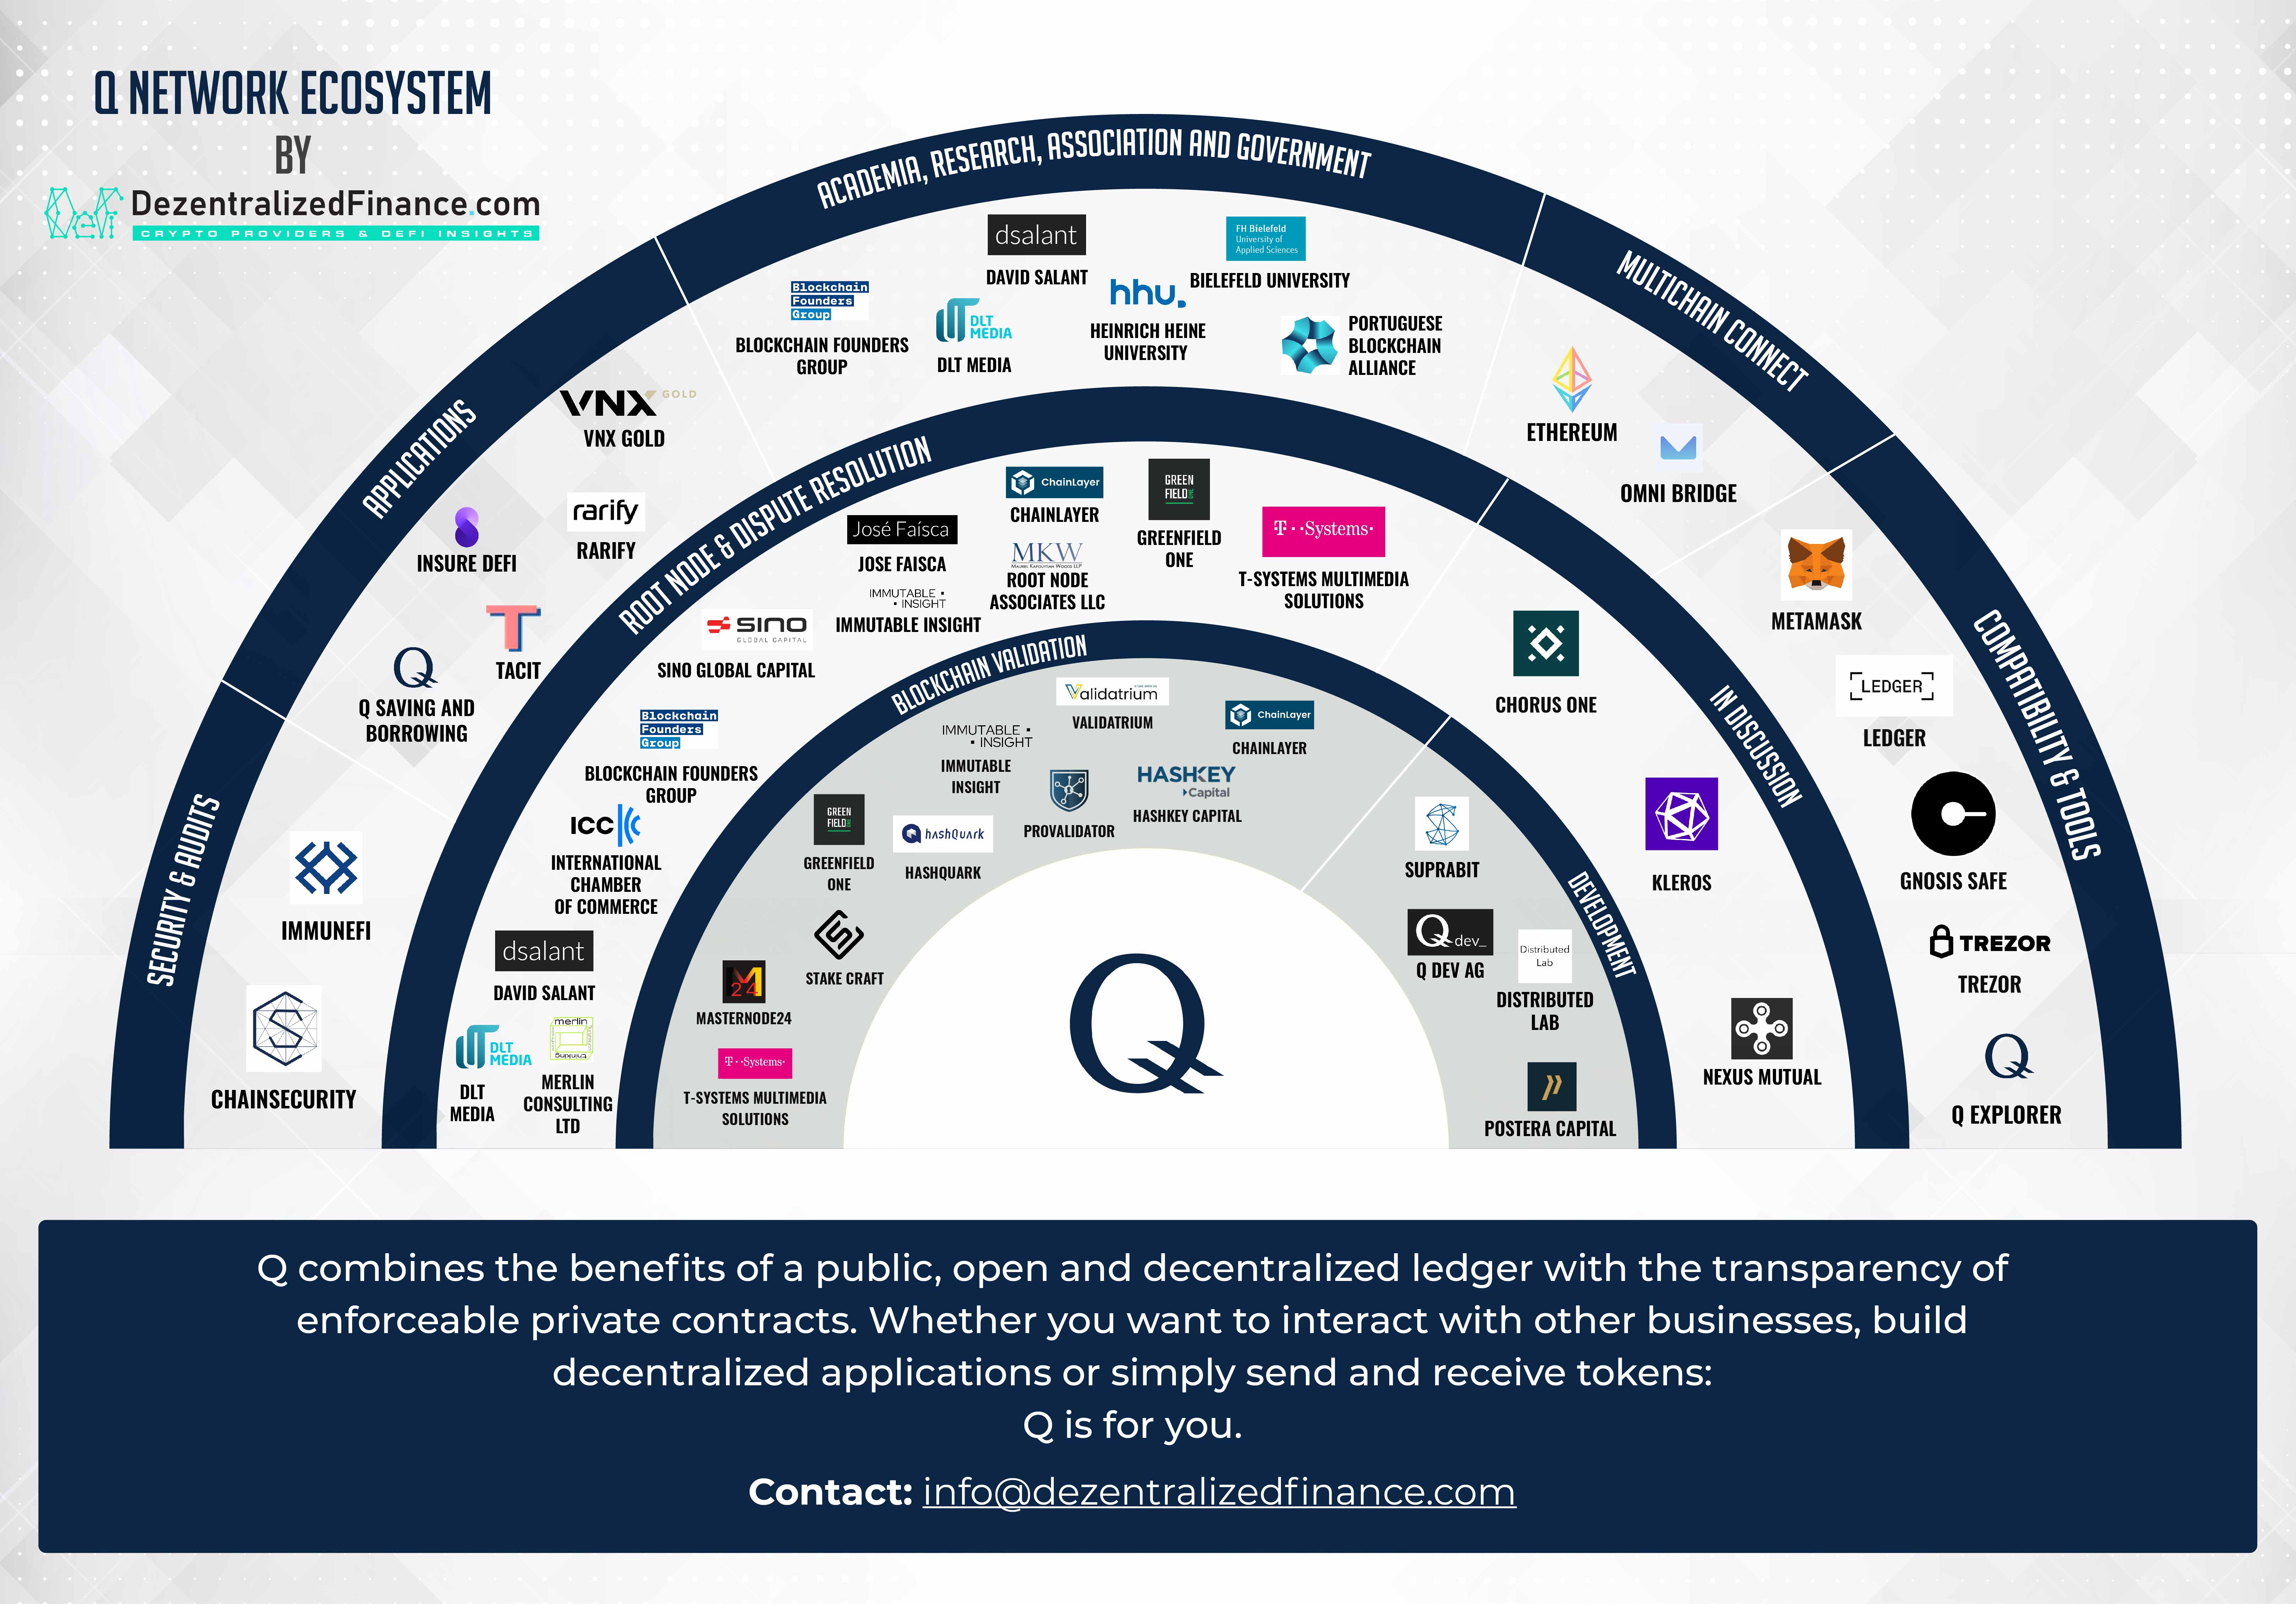 Q Network Ecosystem scaled